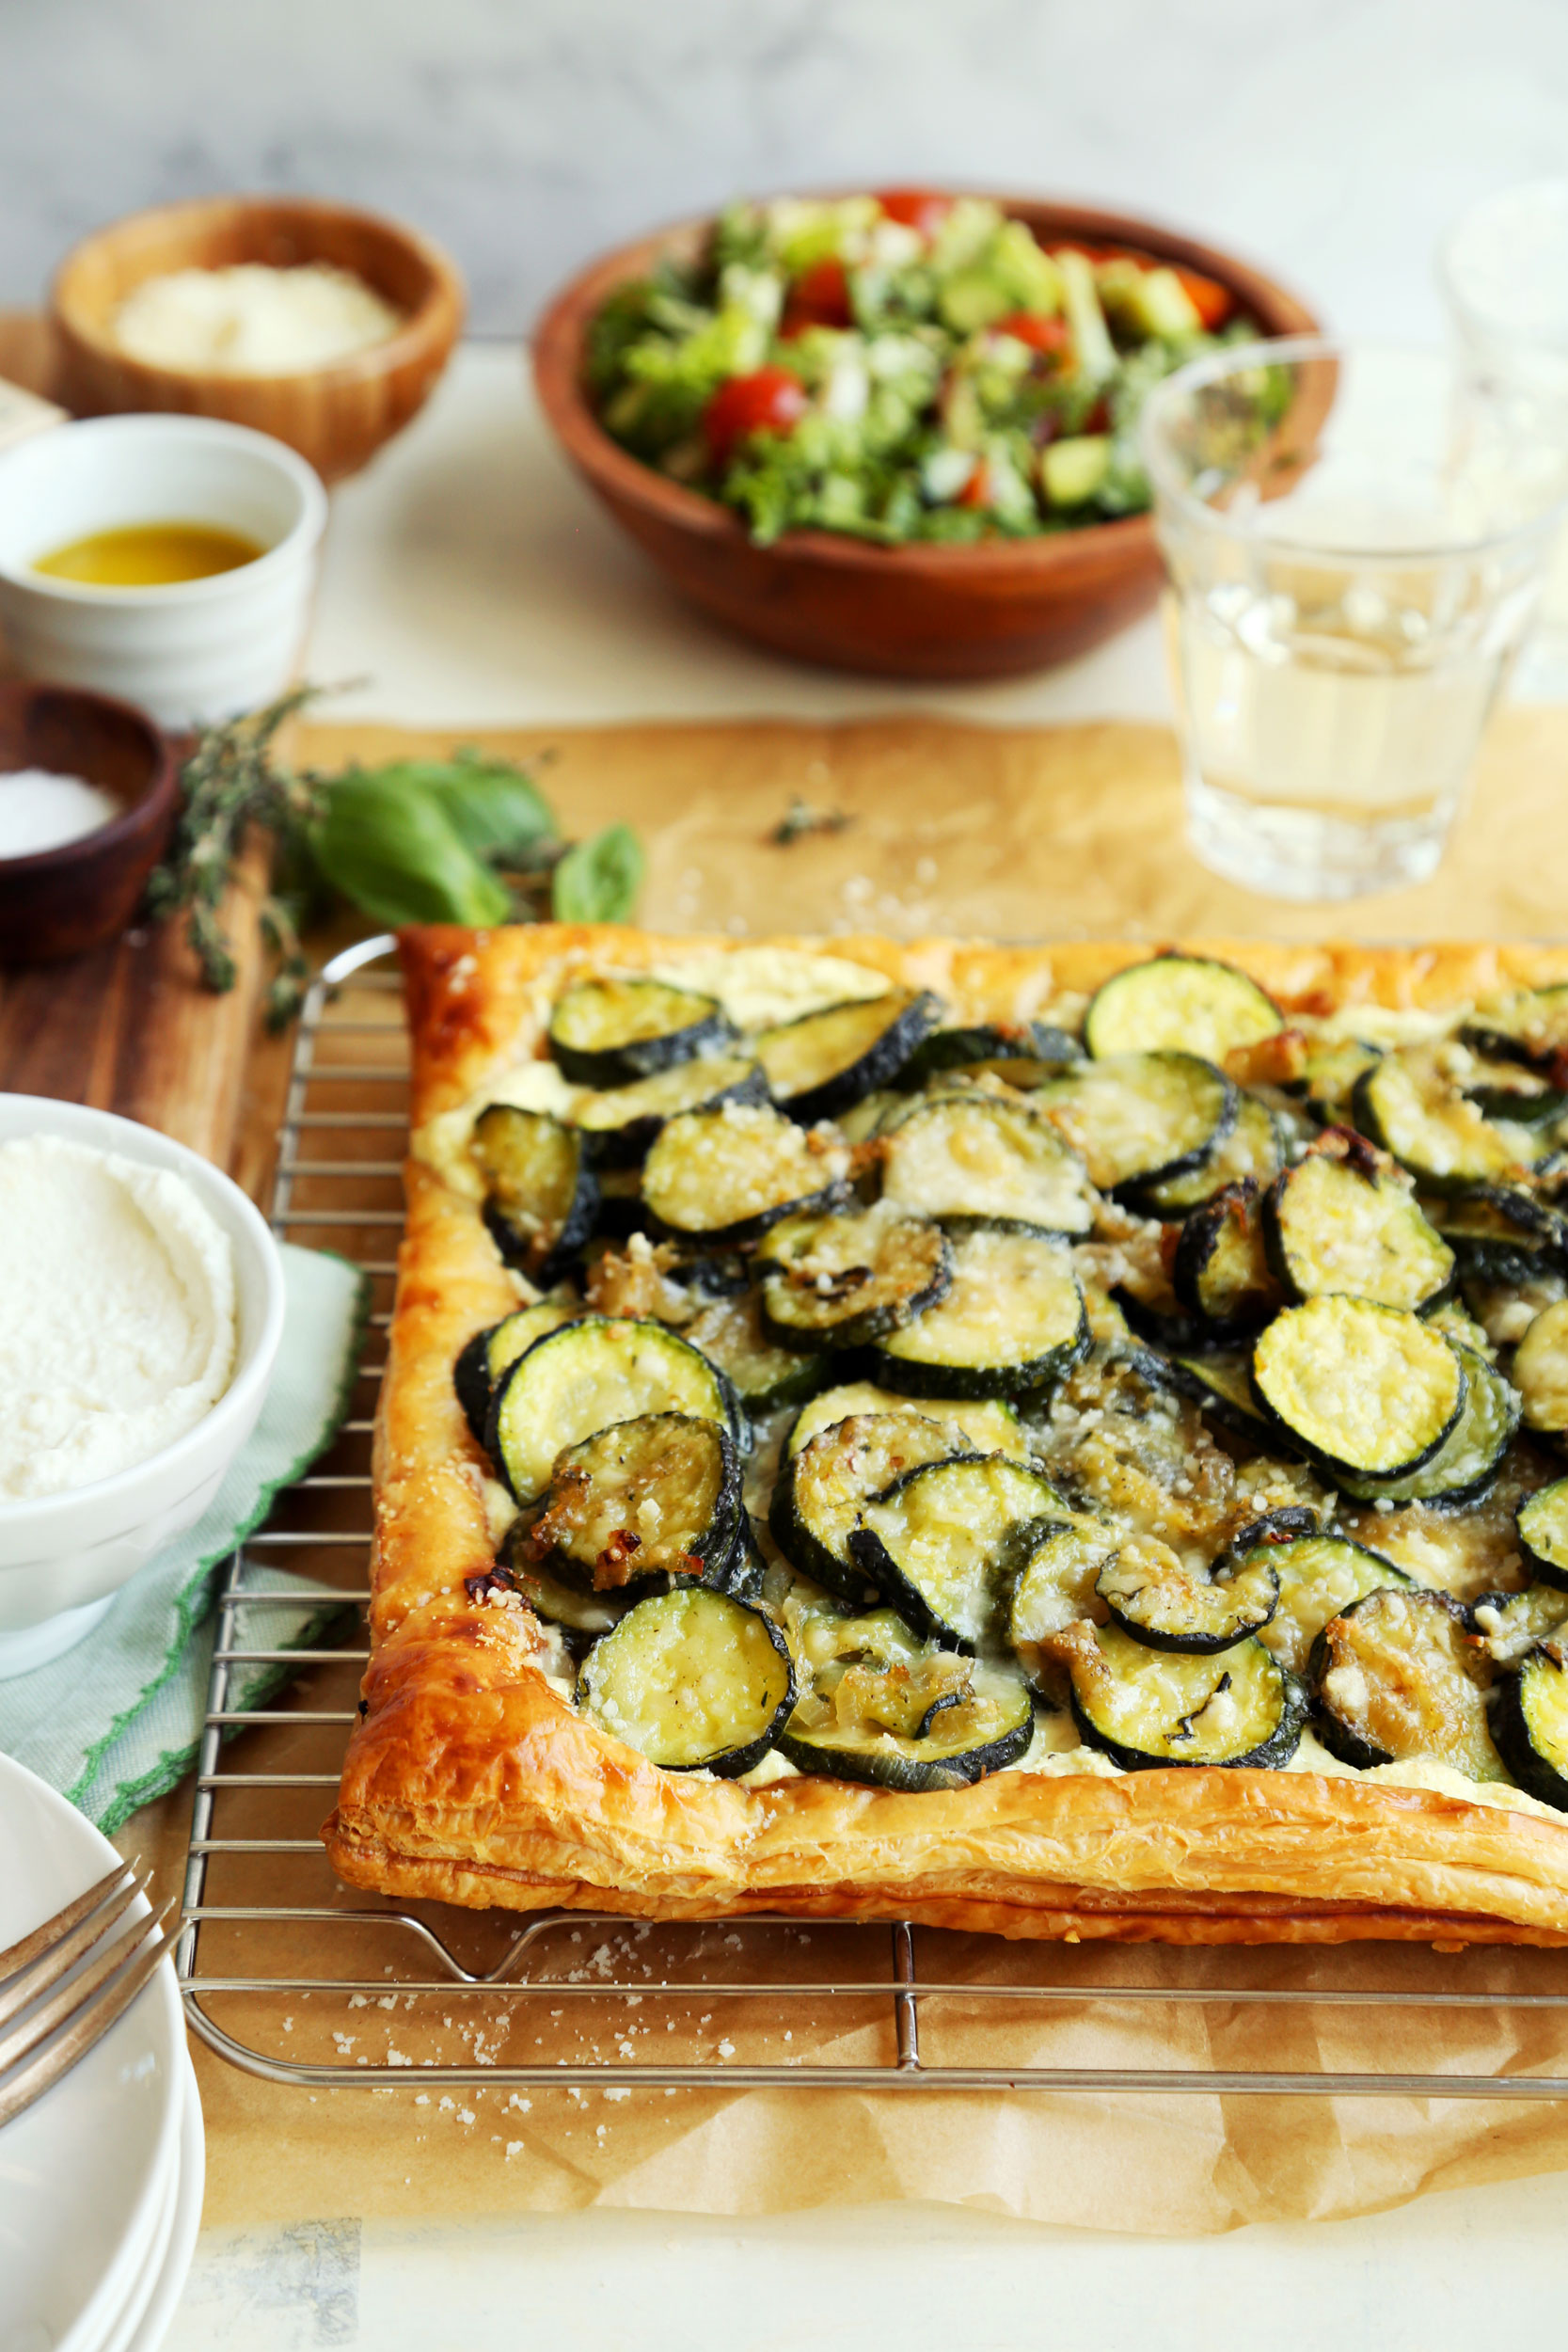 Courgette, Ricotta and Shallot Torte